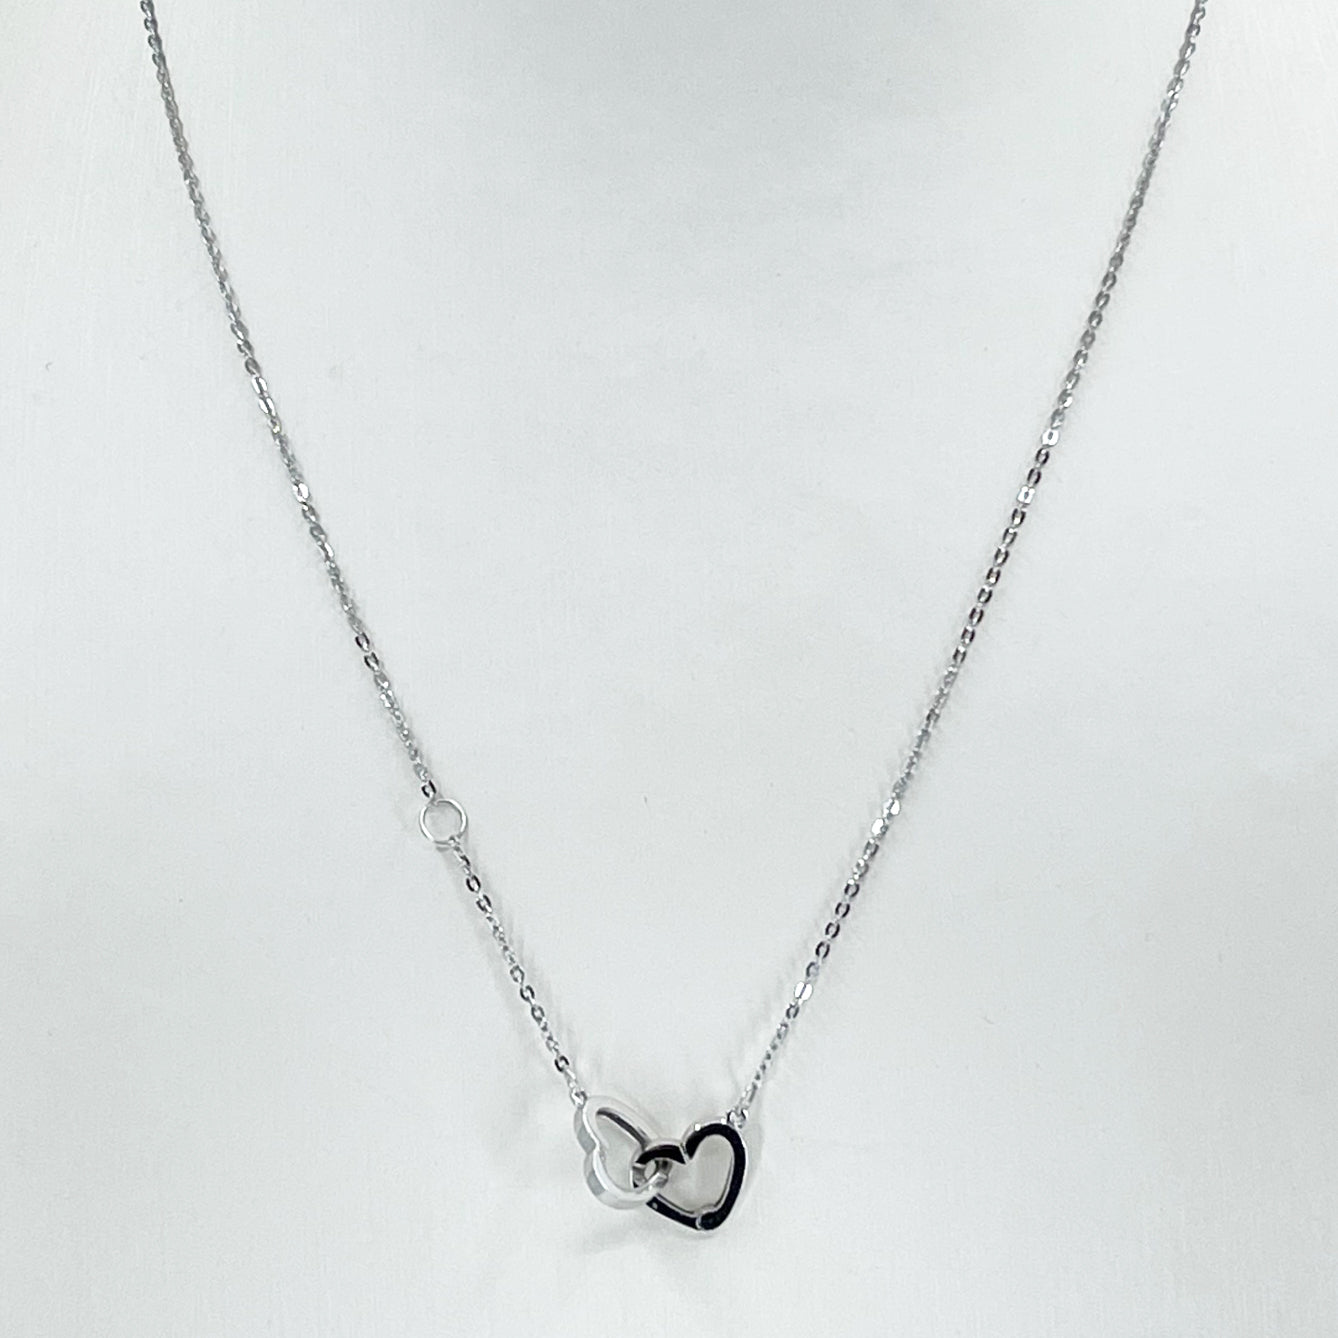 18K Solid White Gold Round Link Chain Necklace with Double Heart Pendant 17" 2.0 Grams